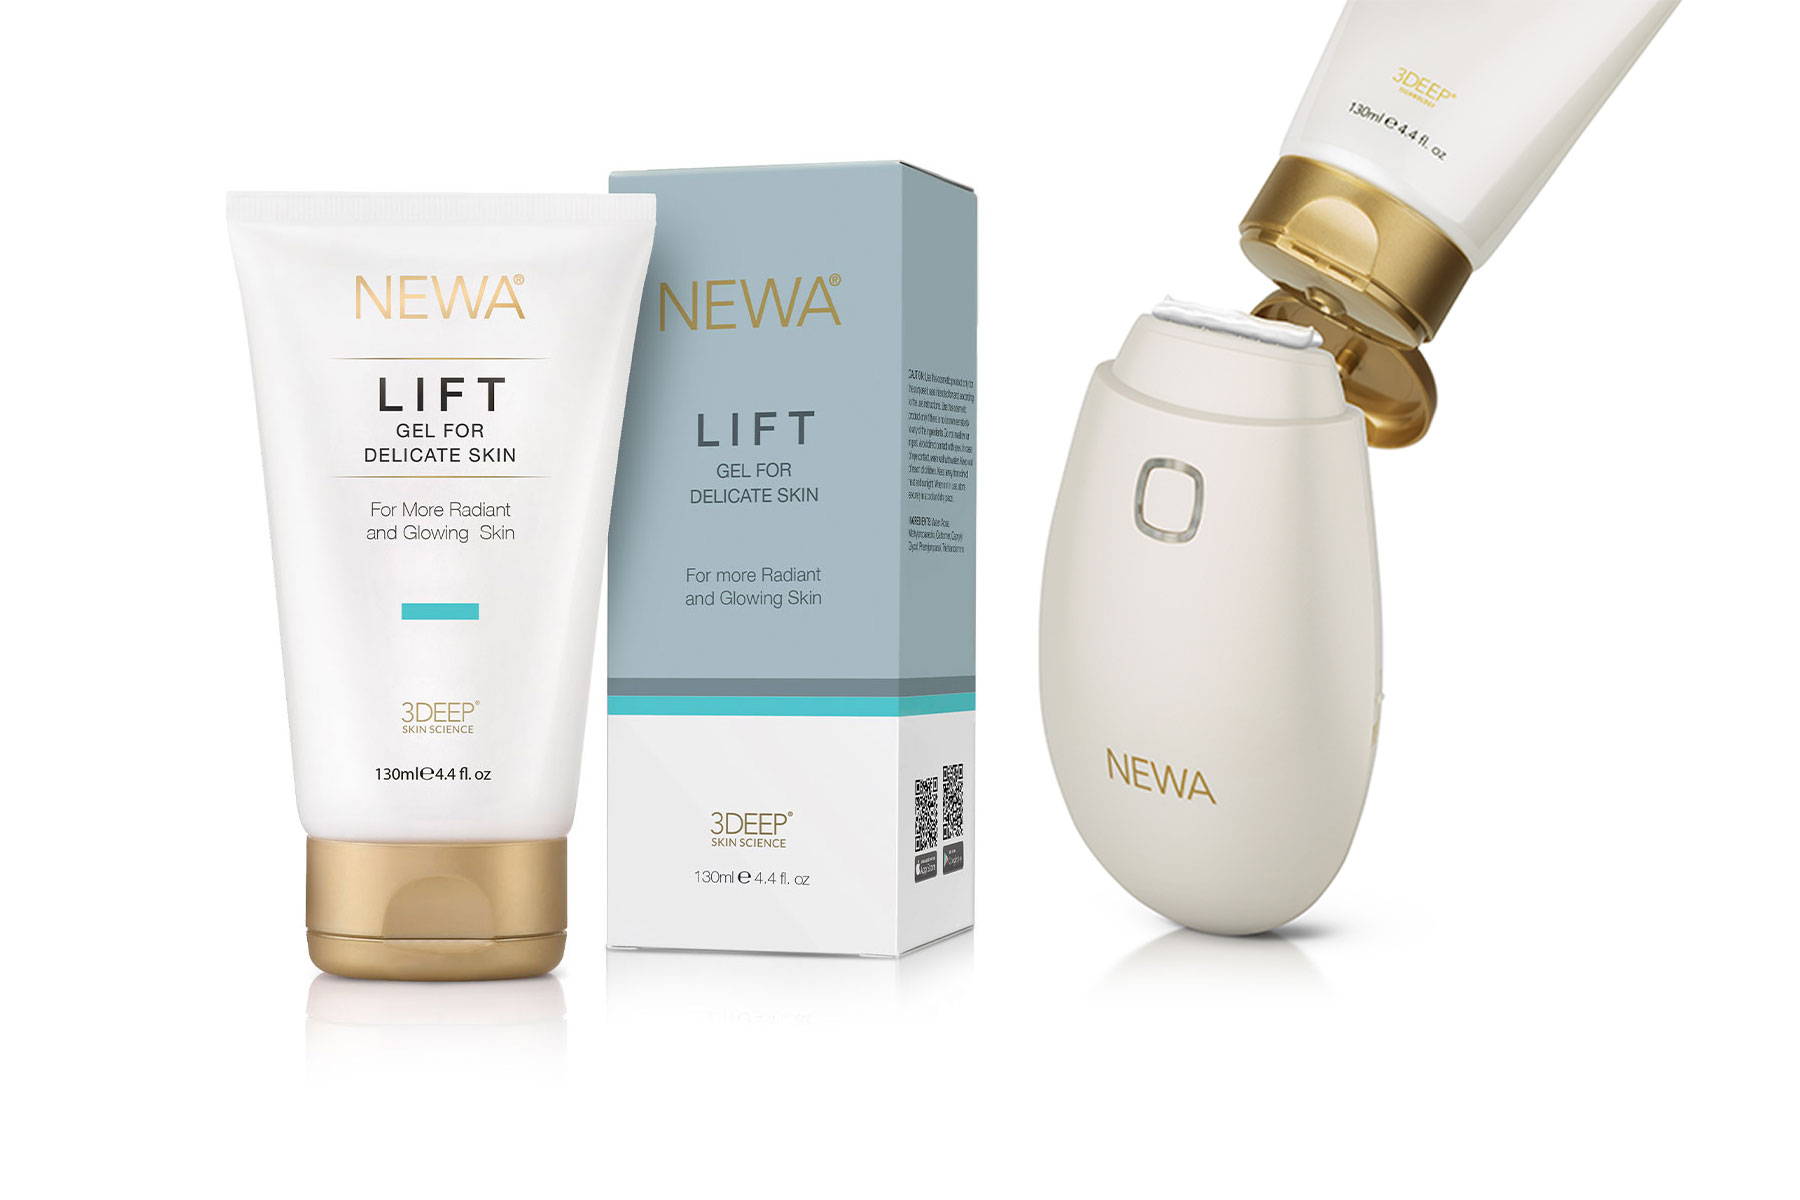 New gel launched for use alongside NEWA